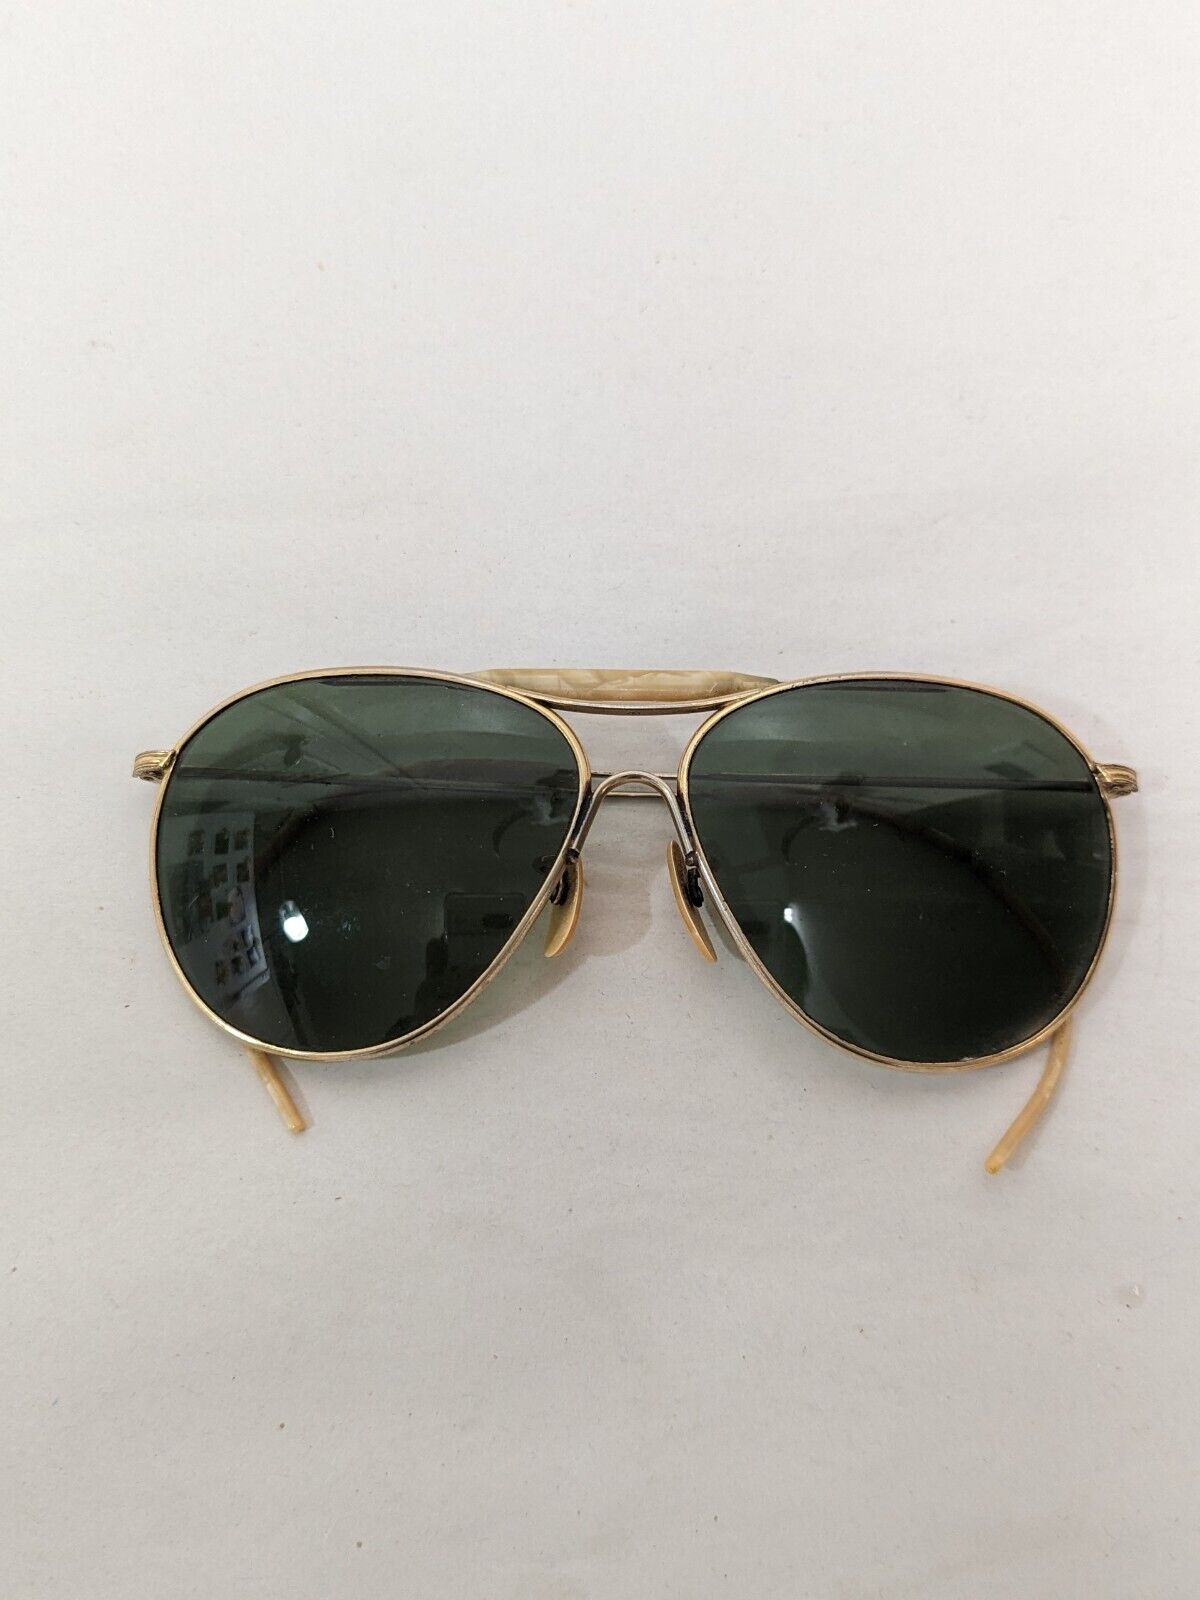 VINTAGE WW2 ERA US AIR FORCE AN6531 TYPE 2 BY AMERICAN OPTICAL SUNGLASSES